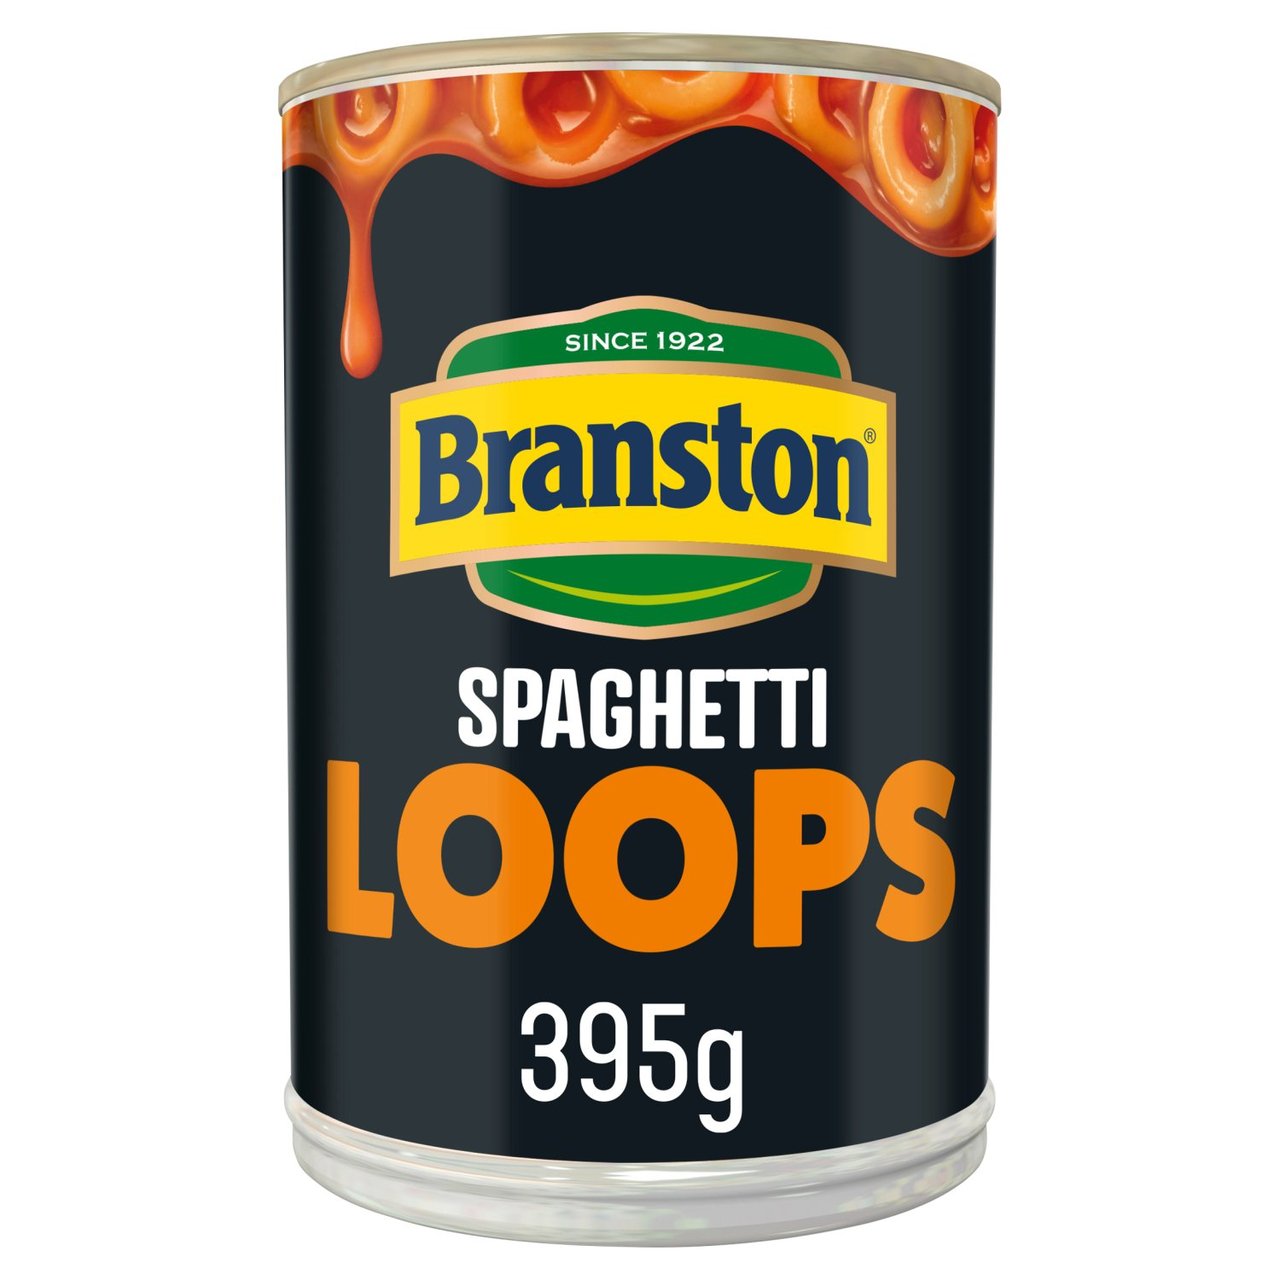 Branston Spaghetti Loops in Tomato Sauce 395g RRP 1 CLEARANCE XL 89p or 2 for 1.50